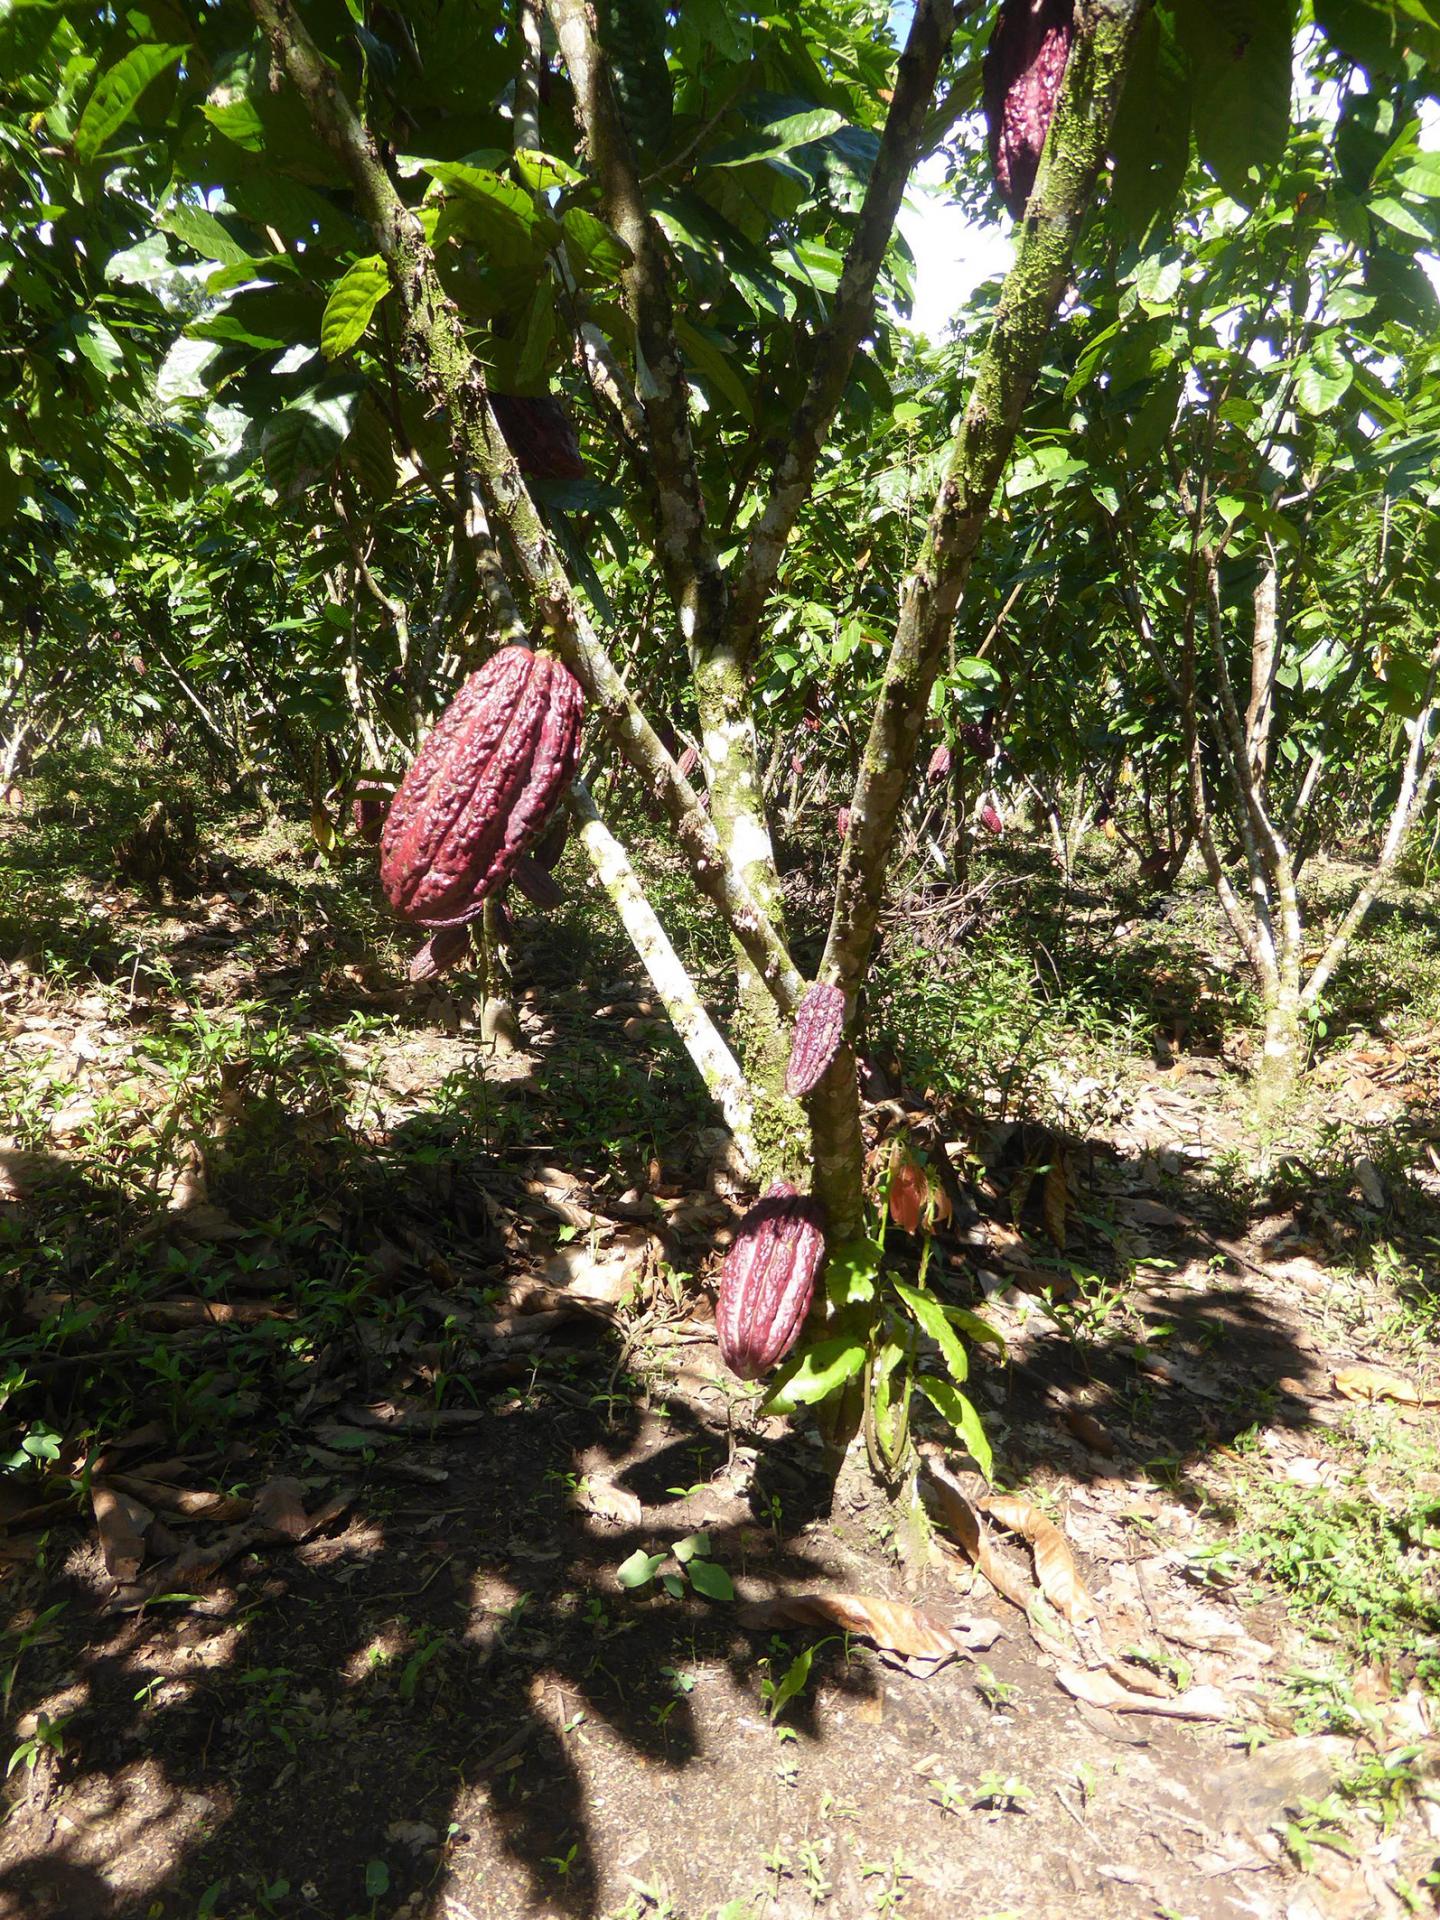 Cultivation of Cocoa Plants